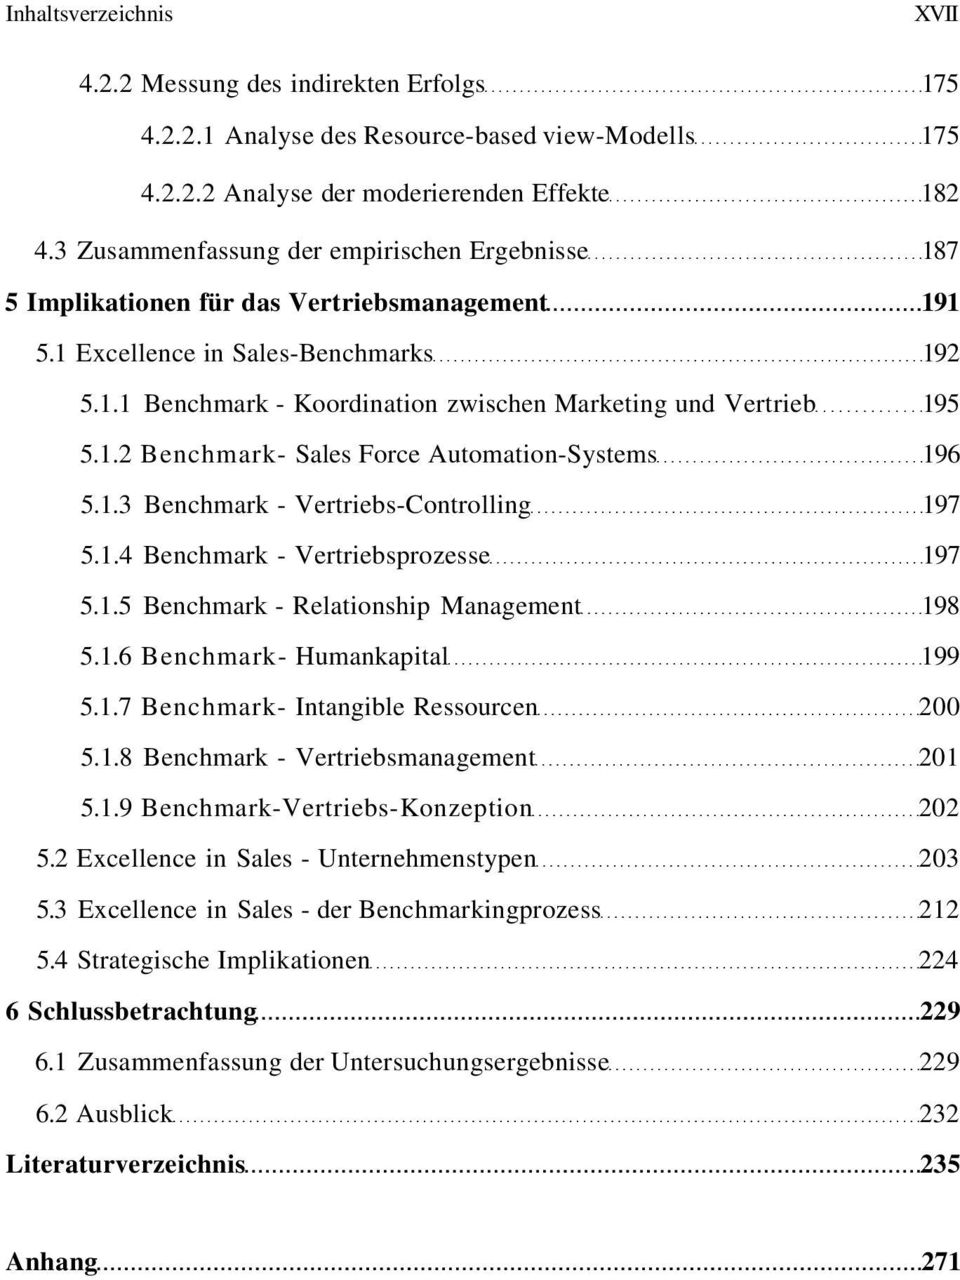 1.2 Benchmark- Sales Force Automation-Systems 196 5.1.3 Benchmark - Vertriebs-Controlling 197 5.1.4 Benchmark - Vertriebsprozesse 197 5.1.5 Benchmark - Relationship Management 198 5.1.6 Benchmark- Humankapital 199 5.